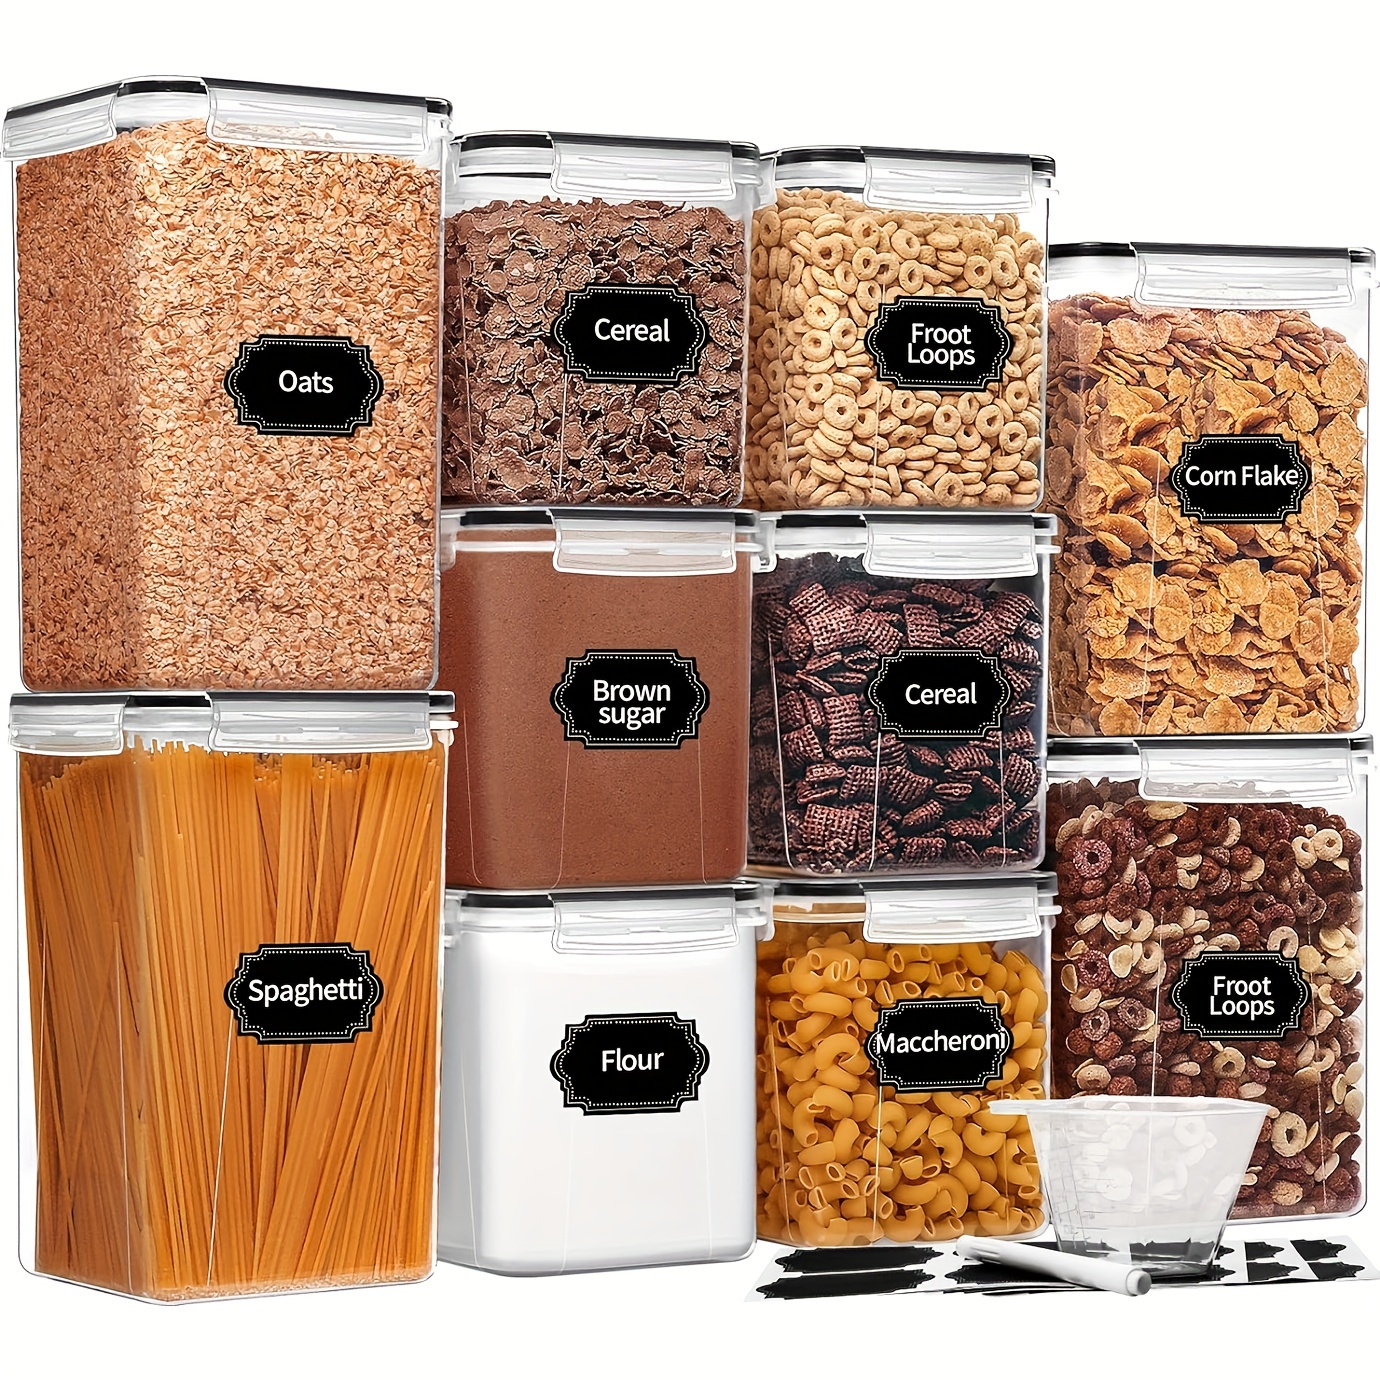 

Skroam Large Airtight Food Storage Containers With Lids, 10 Pack Storage Set - Bpa Free Pantry Organizers And Storage For Flour, Sugar & Rice With Measuring Cup, Labels & Marker